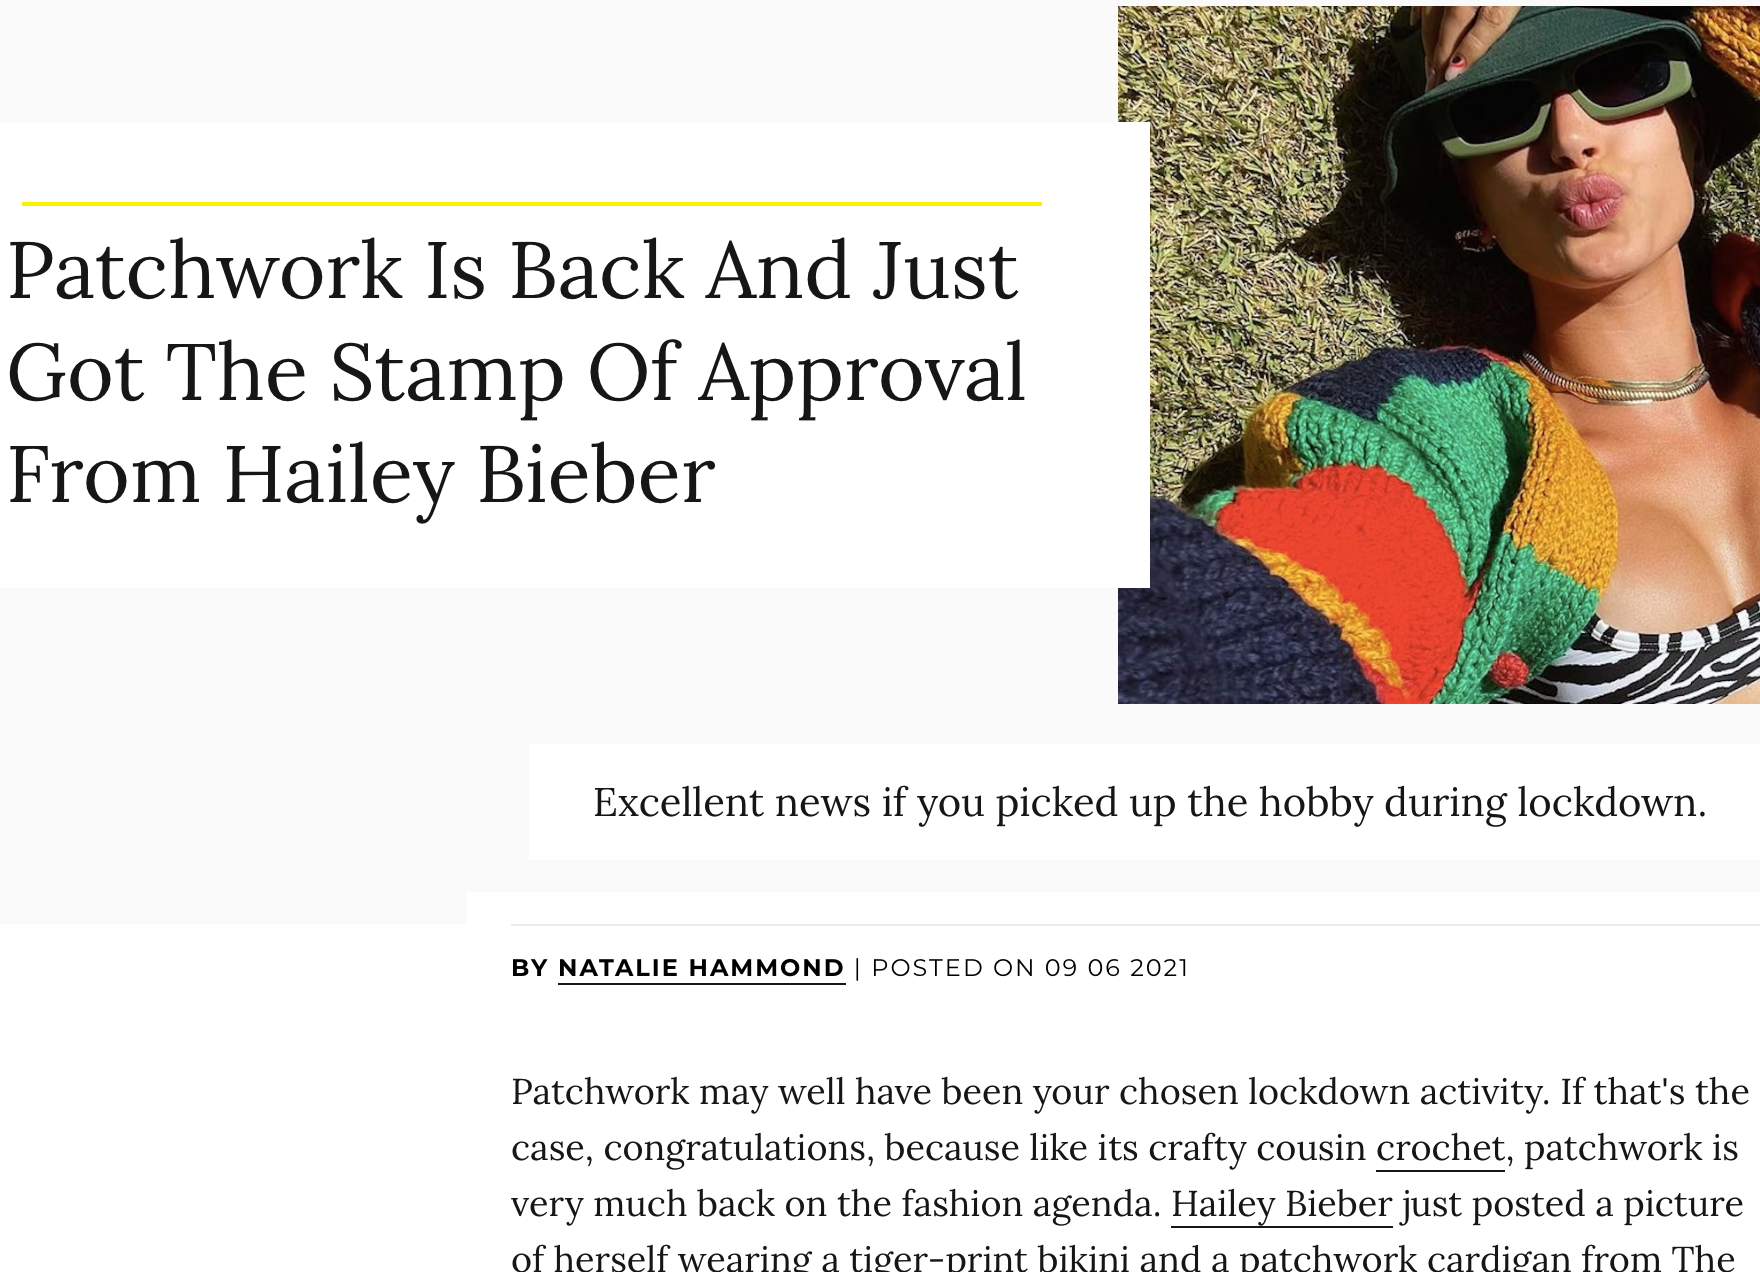 Patchwork Is Back And Got The Stamp From Hailey Bieber